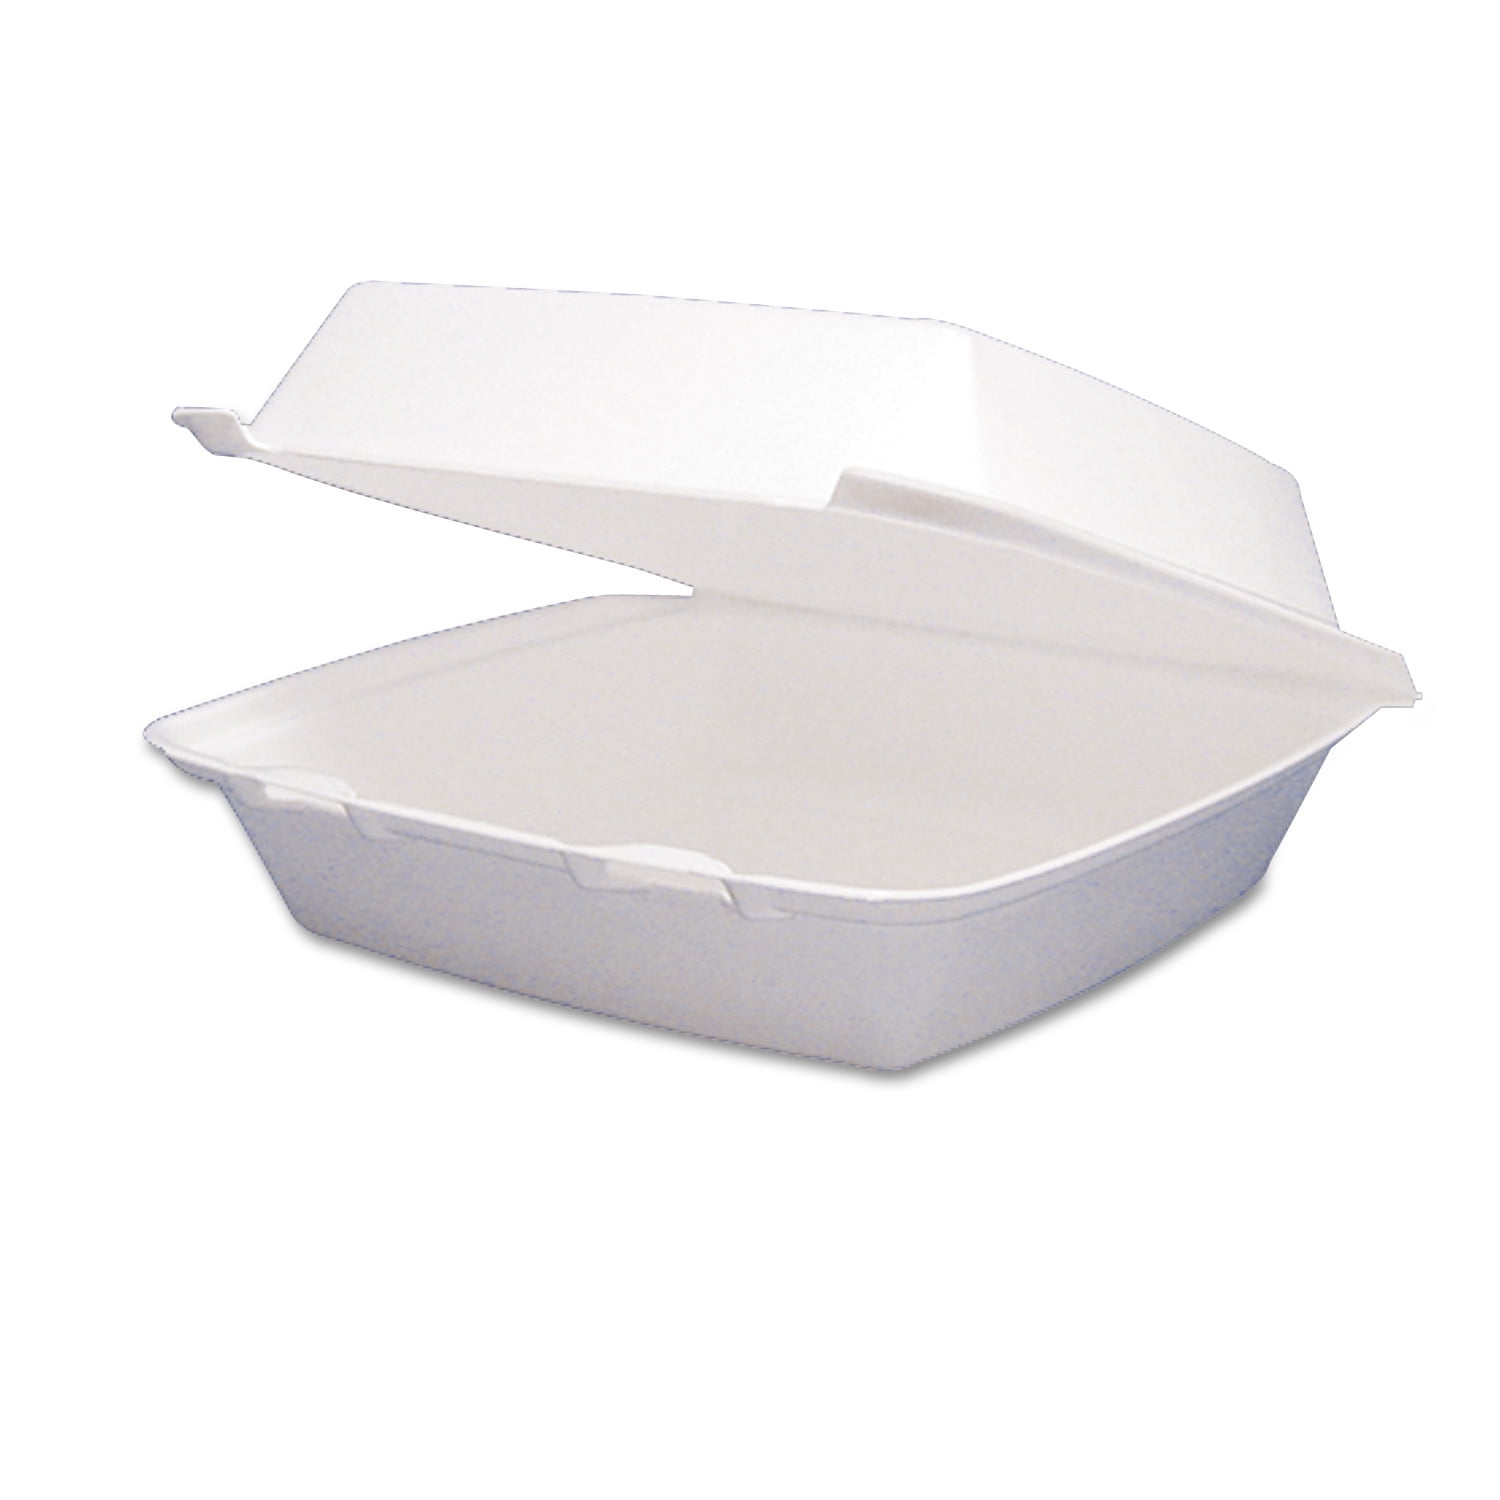 Member's Mark One-Compartment Hinged Lid Container by Hefty 125 ct. 